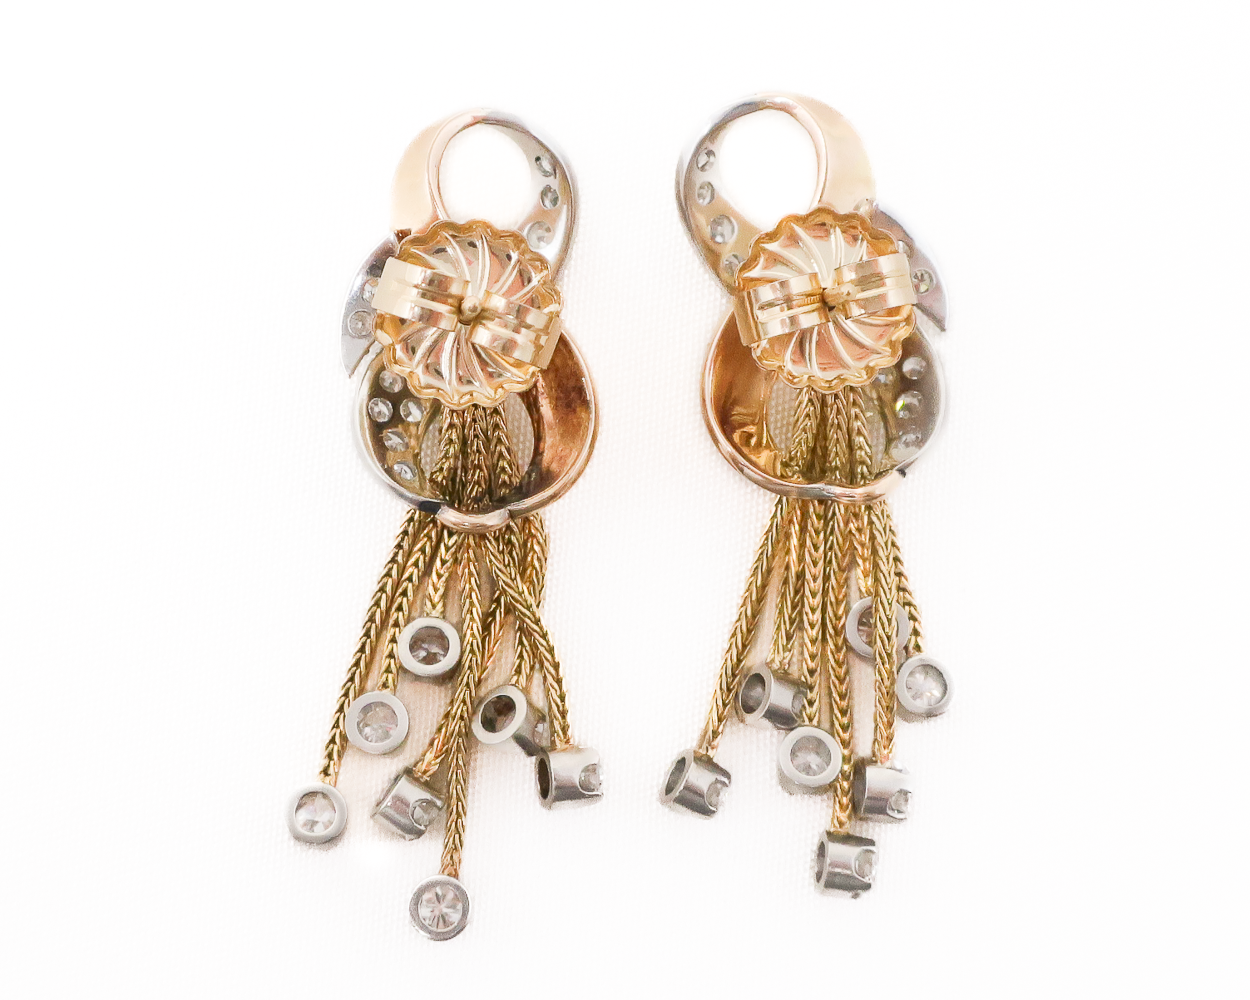 Midcentury Diamond Earrings with Gold Tassels — Isadoras Antique